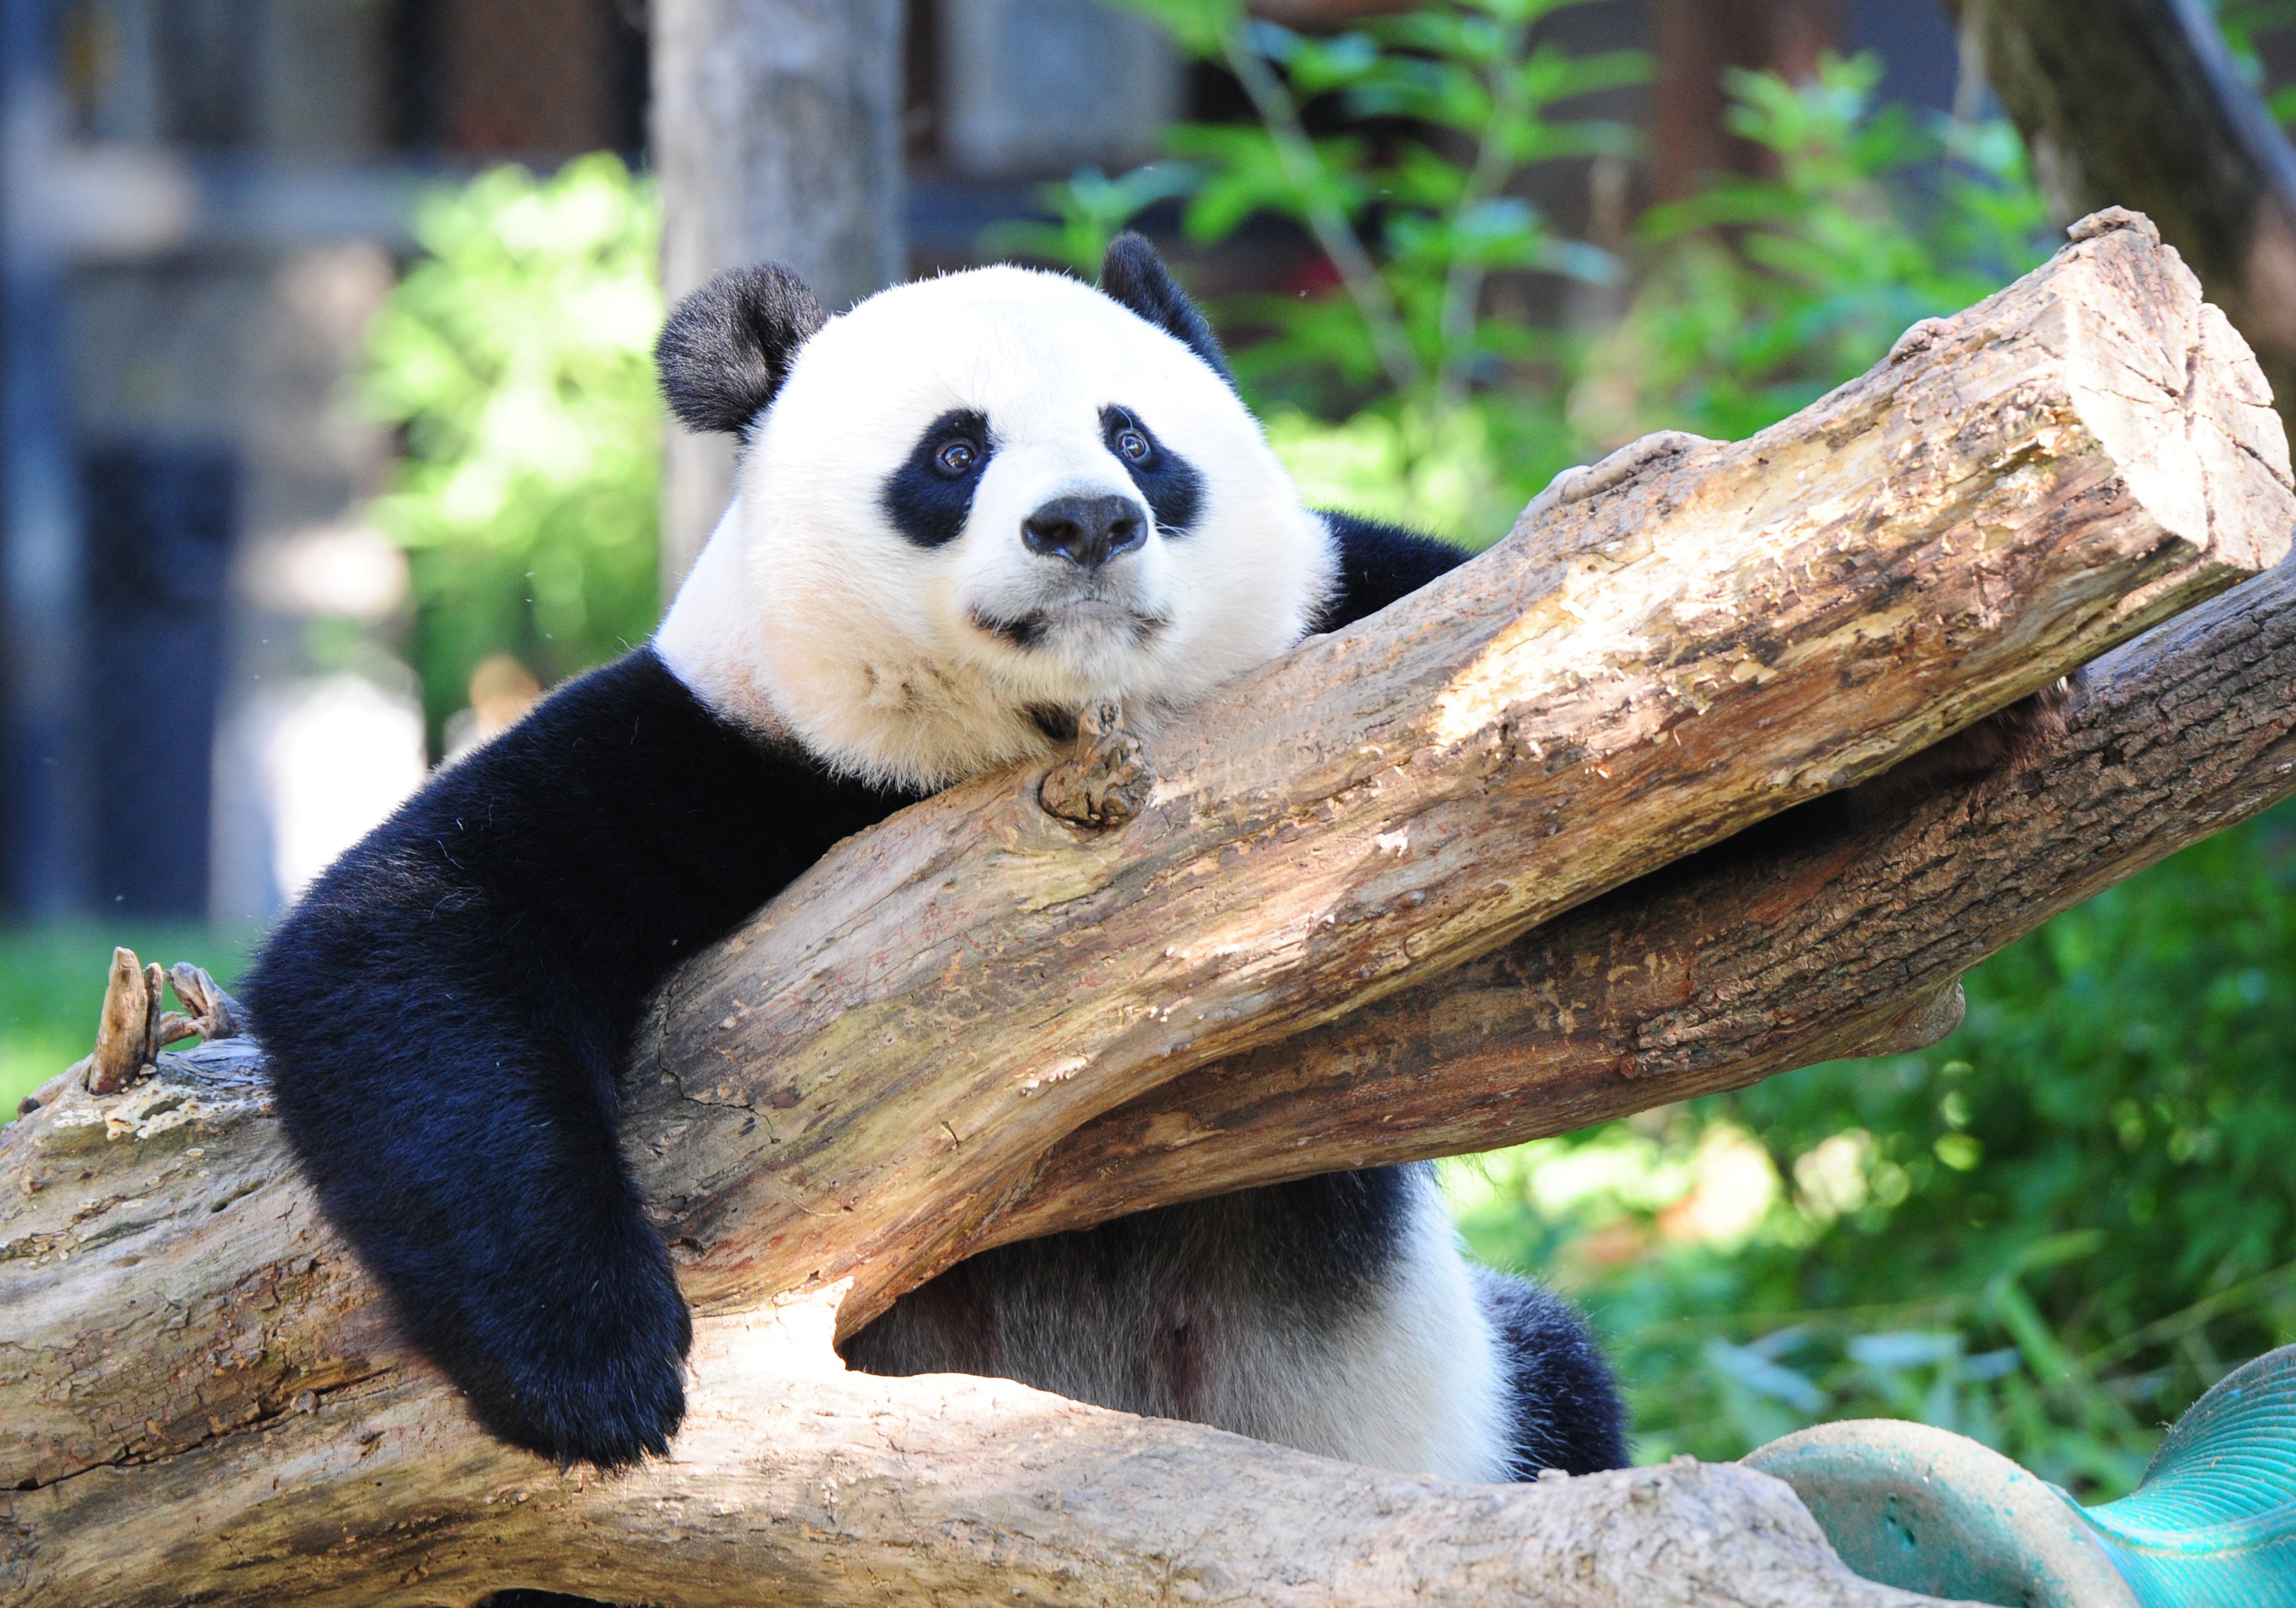 (FILES) This file photo taken on August 24, 2016 shows Giant panda Mei Xiang resting in her enclosure at the National Zoo in Washington, DC. Decades of conservation work in China have paid off for the giant panda, whose status was upgraded September 4, 2016 from "endangered" to "vulnerable" due to a population rebound, officials said. The improvement for the giant panda (Ailuropoda melanoleuca) was announced as part of an update to the International Union for Conservation of Nature (IUCN) Red List, the world's most comprehensive inventory of plants and animals. The latest estimates show a population of 1,864 adult giant pandas. Although exact numbers are not available, adding cubs to the projection would mean about 2,060 pandas exist today, said the IUCN.  / AFP PHOTO / Karen BLEIER